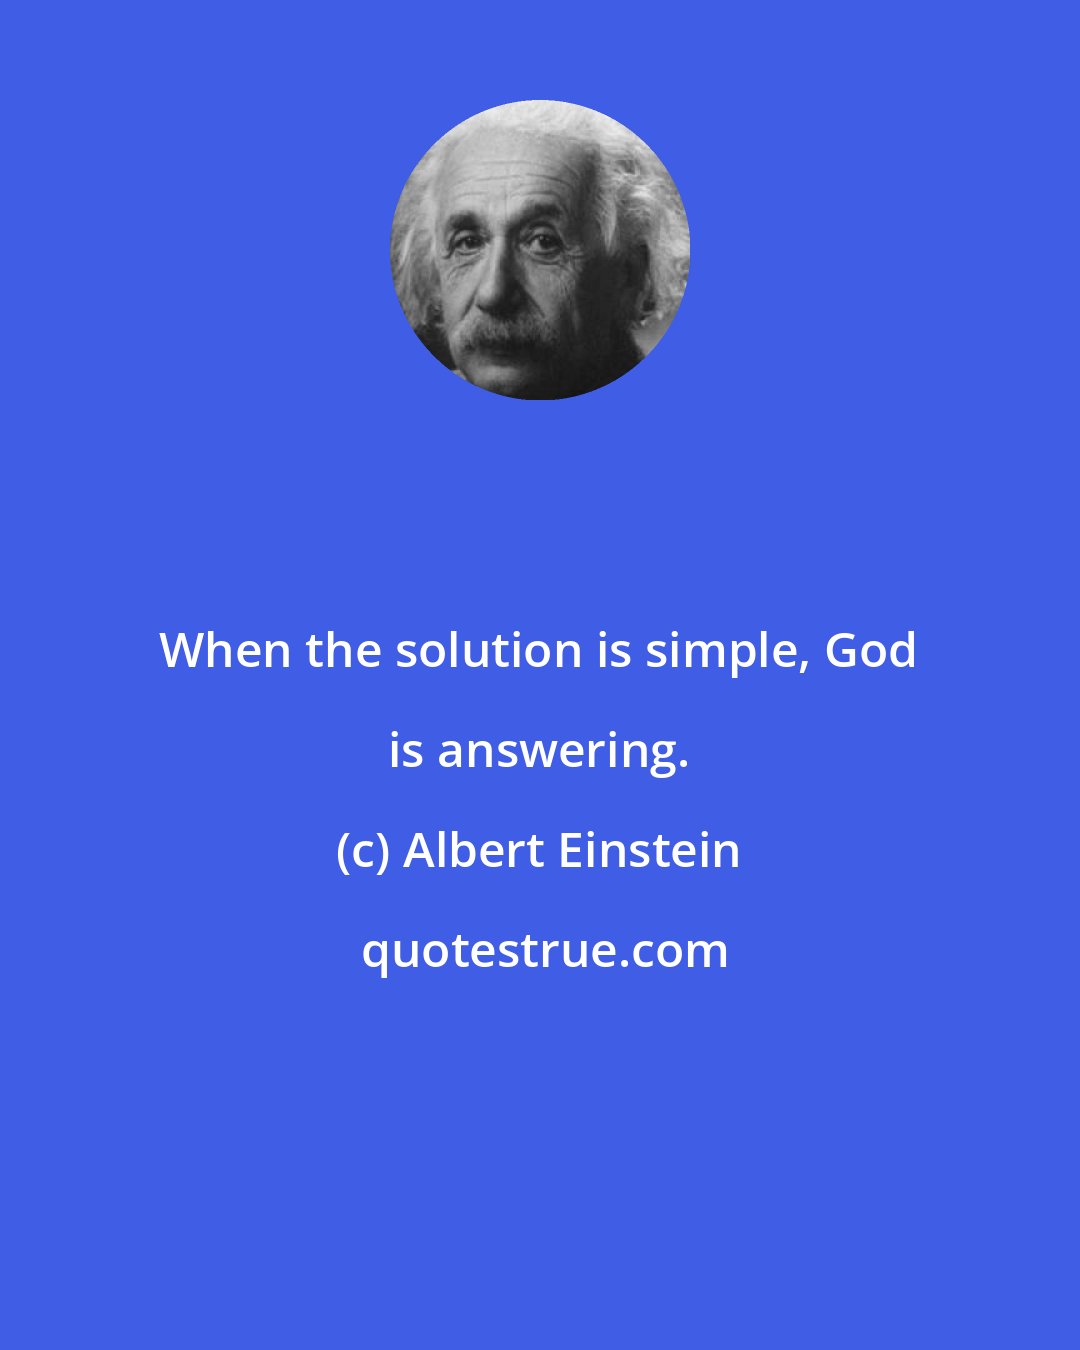 Albert Einstein: When the solution is simple, God is answering.